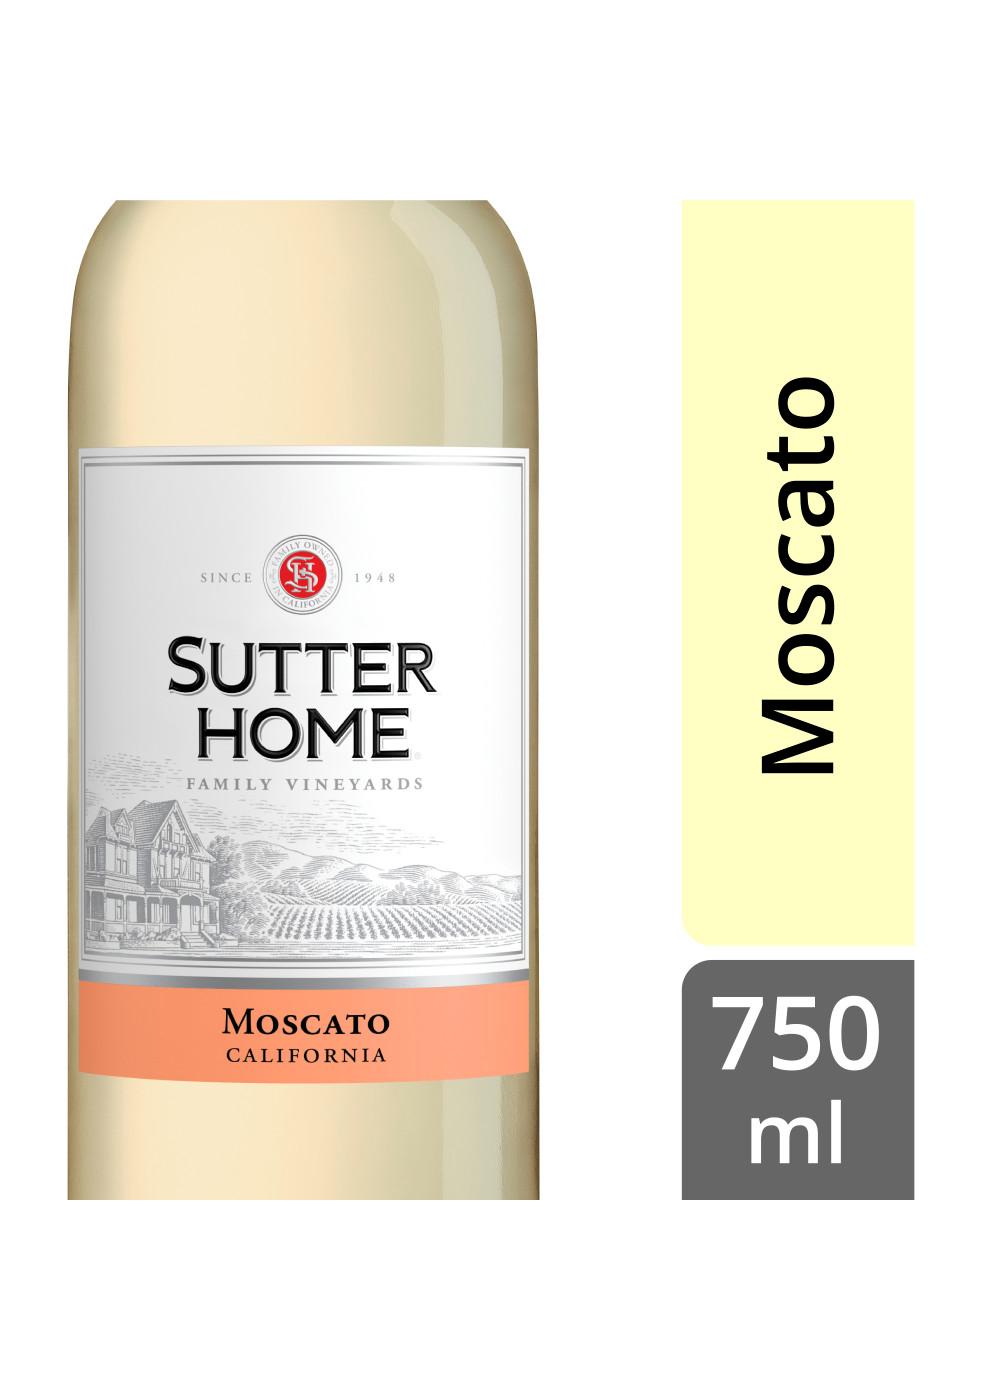 Sutter Home Family Vineyards Moscato Still White Wine; image 4 of 4